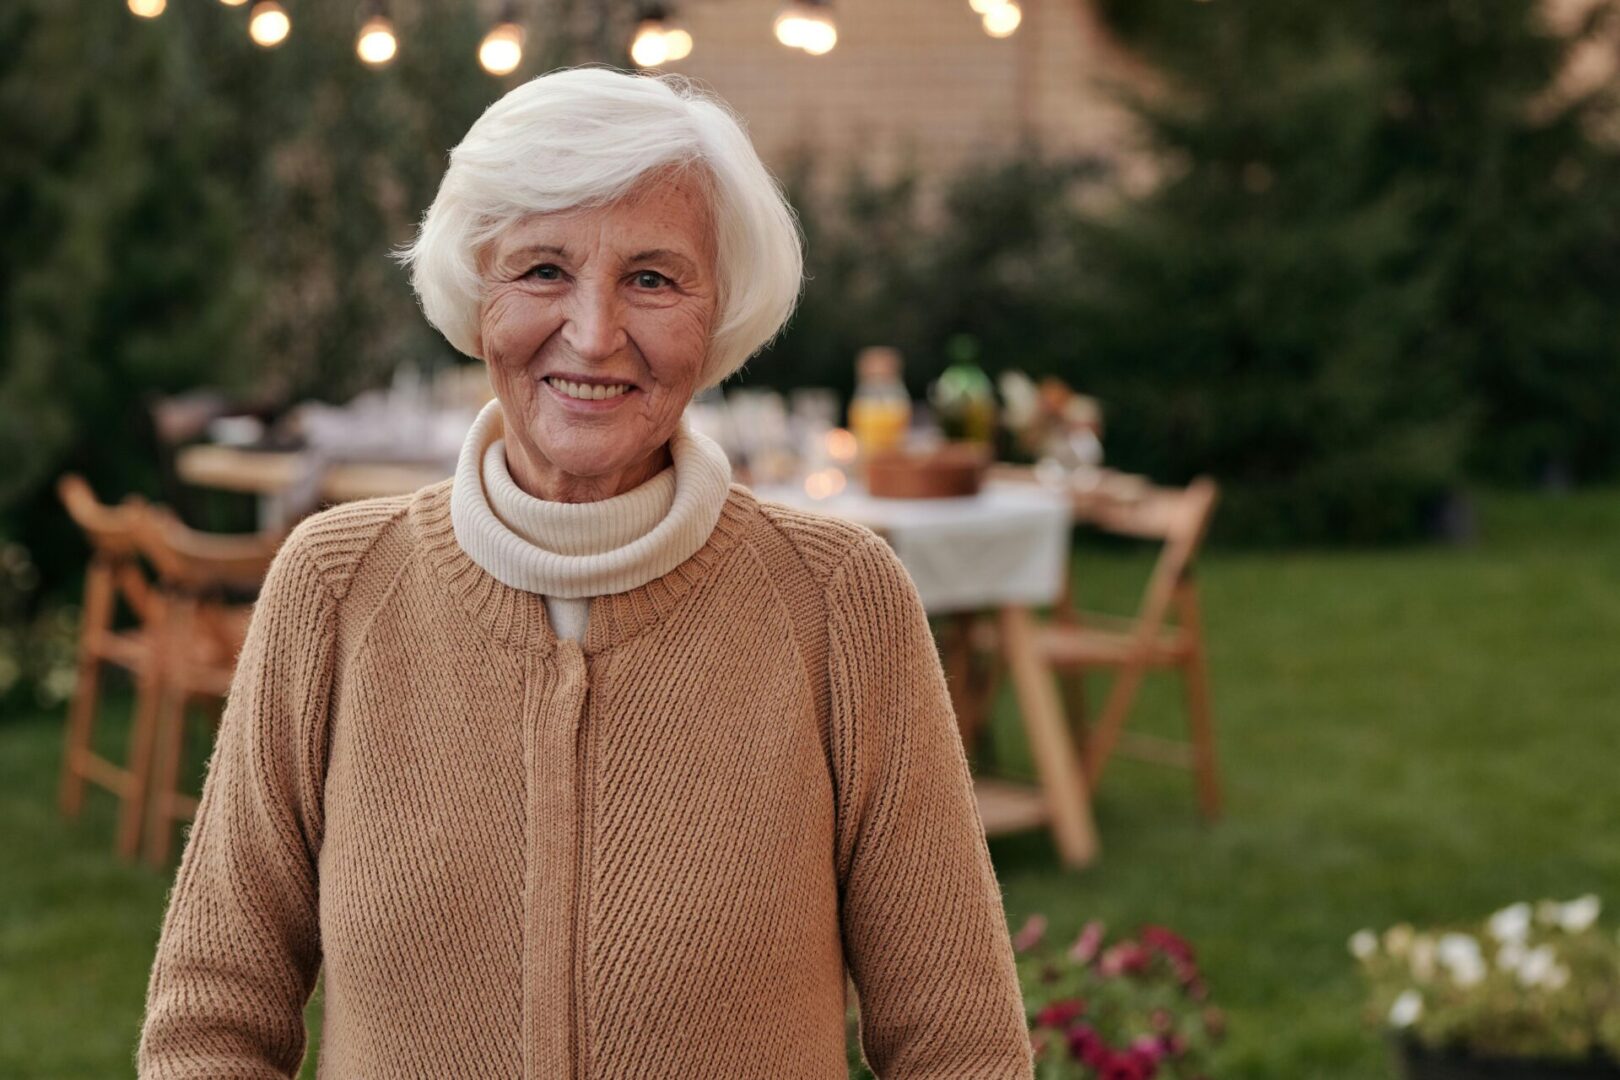 A woman standing in front of an outdoor table.